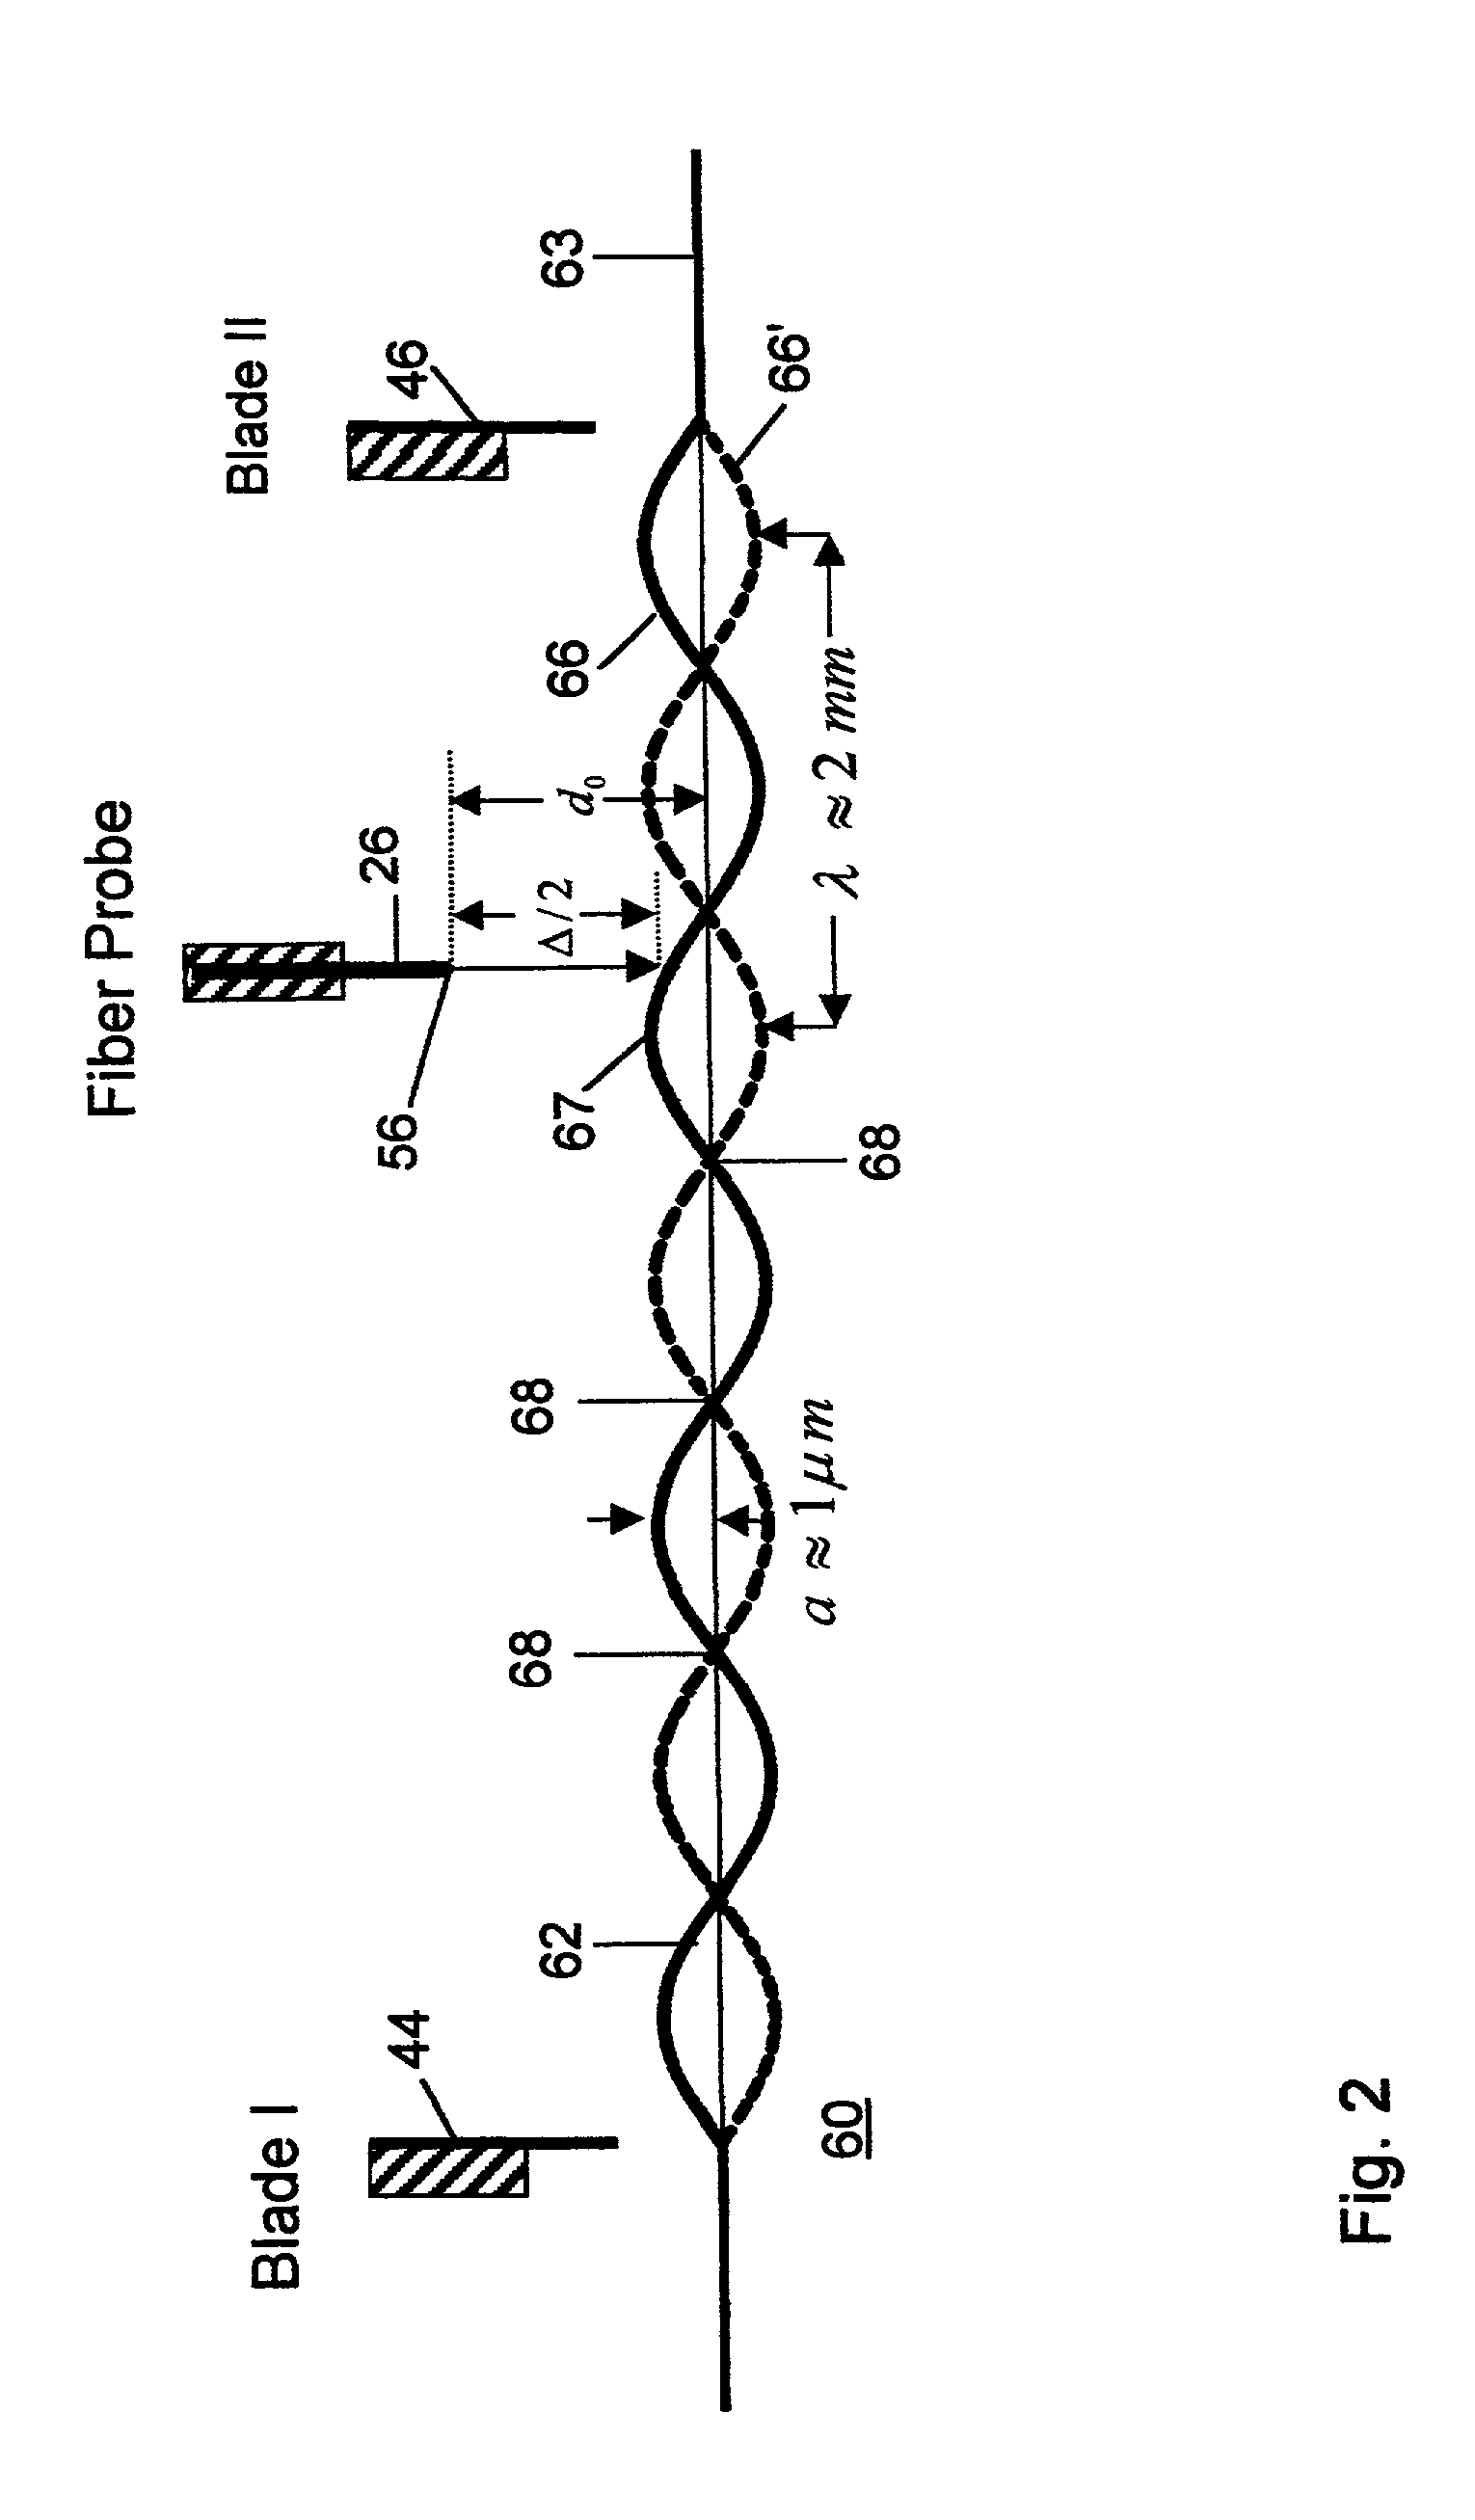 Apparatus and method for measurement of fluid viscosity